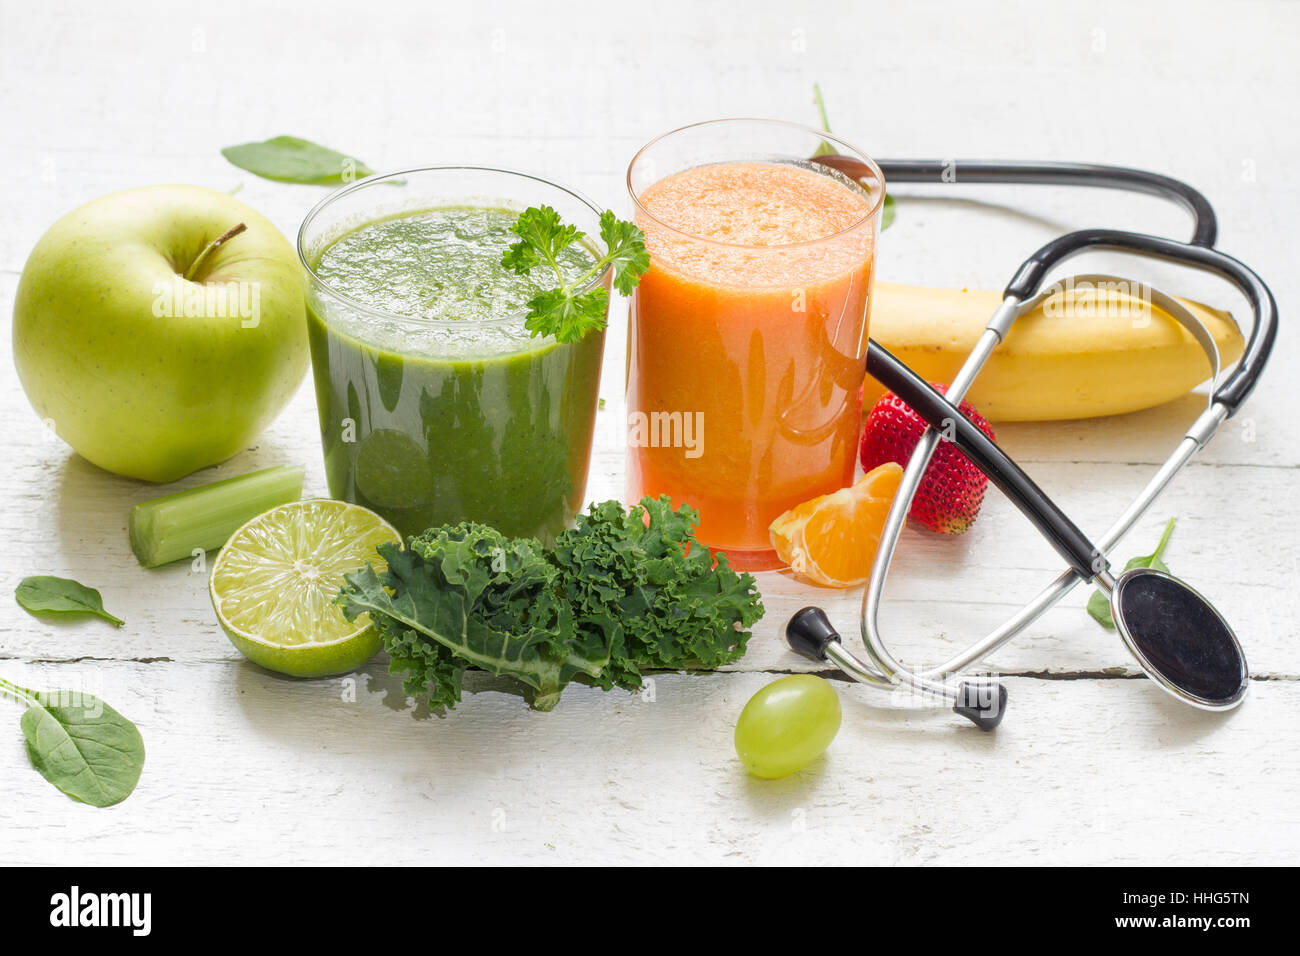 Fruits, vegetables, juice, smoothie and dumbbell health diet and fitness lifestyle concept Stock Photo